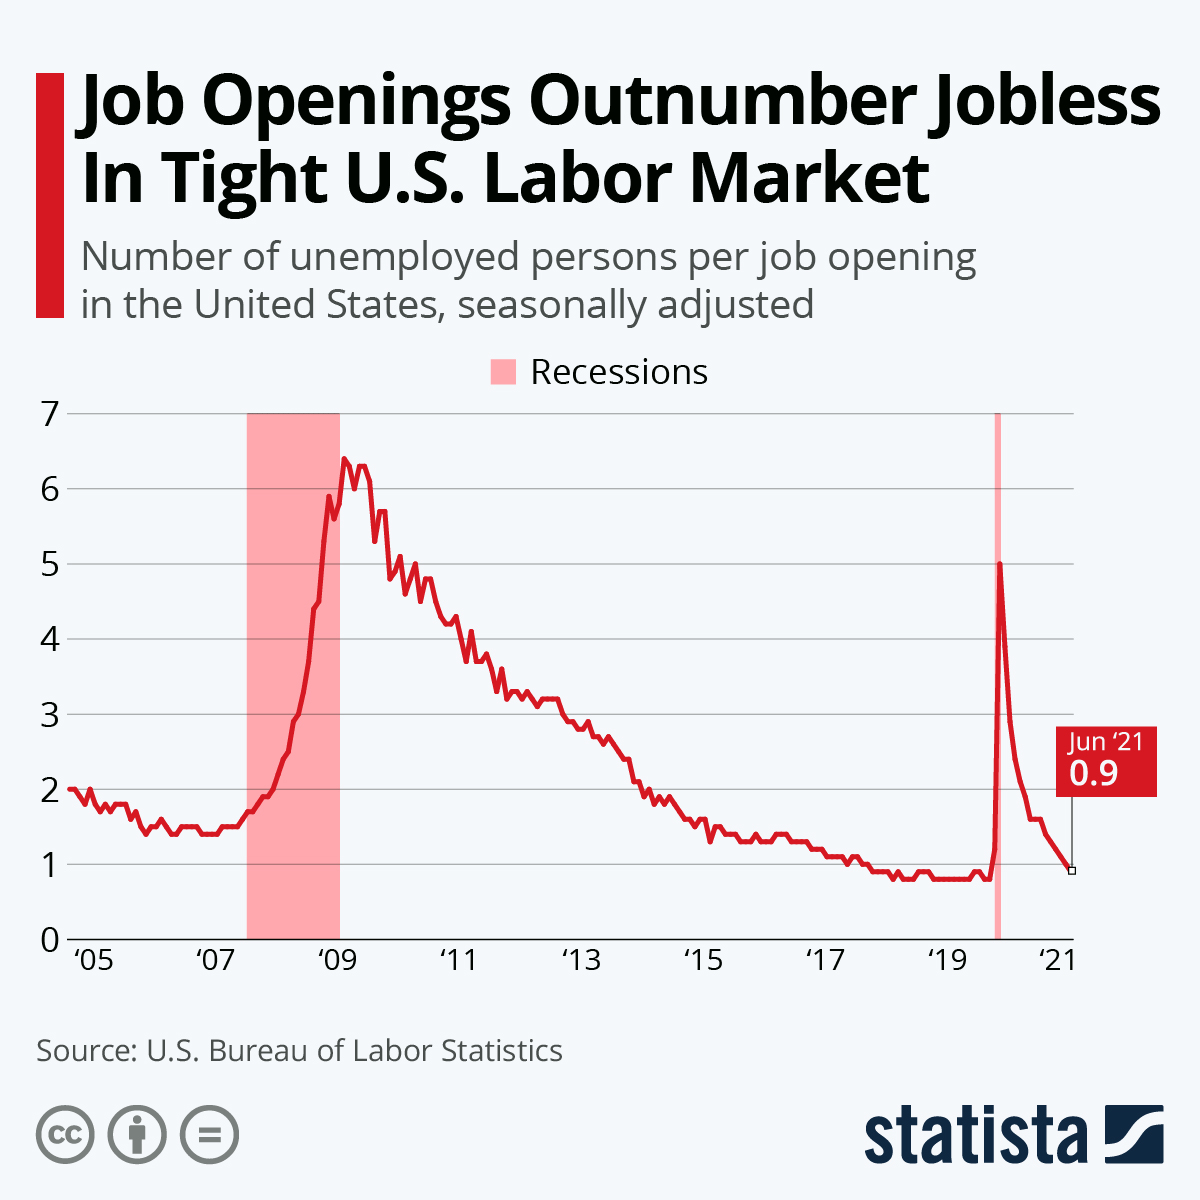 Job Openings Outnumber Jobless In Tight U.S. Labor Market